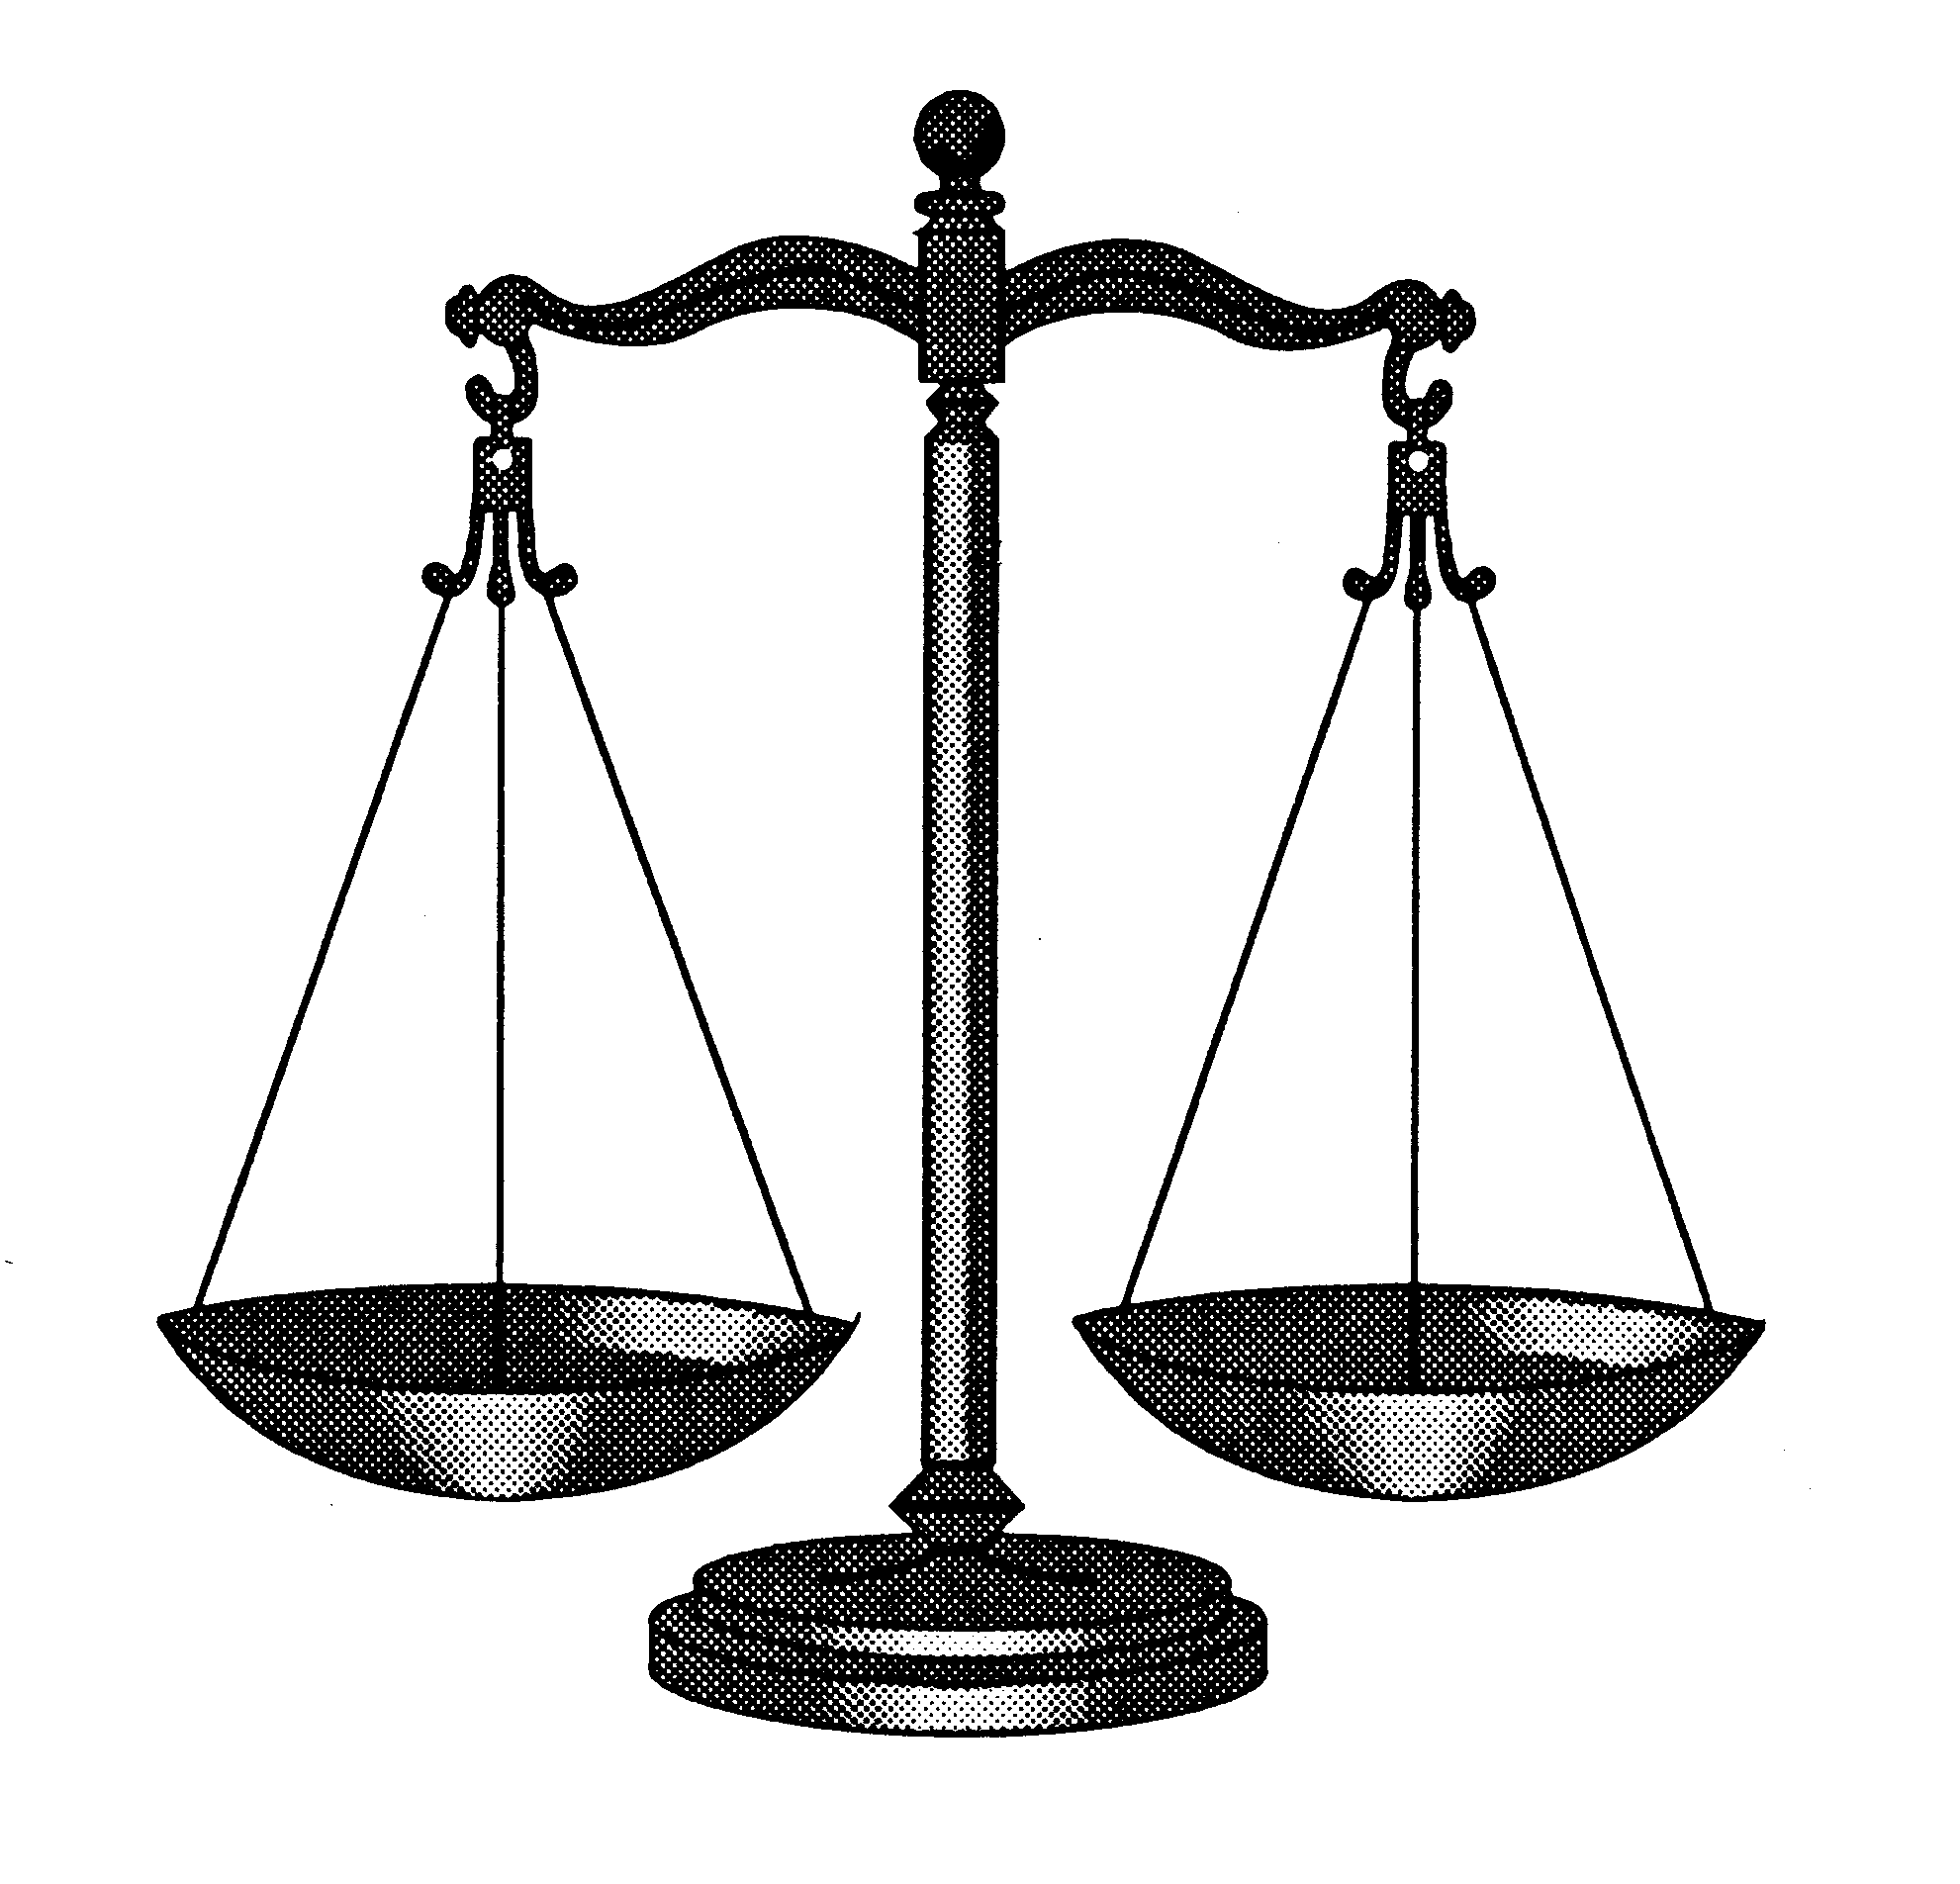 Picture Of Scale Of Justice - Clipart library